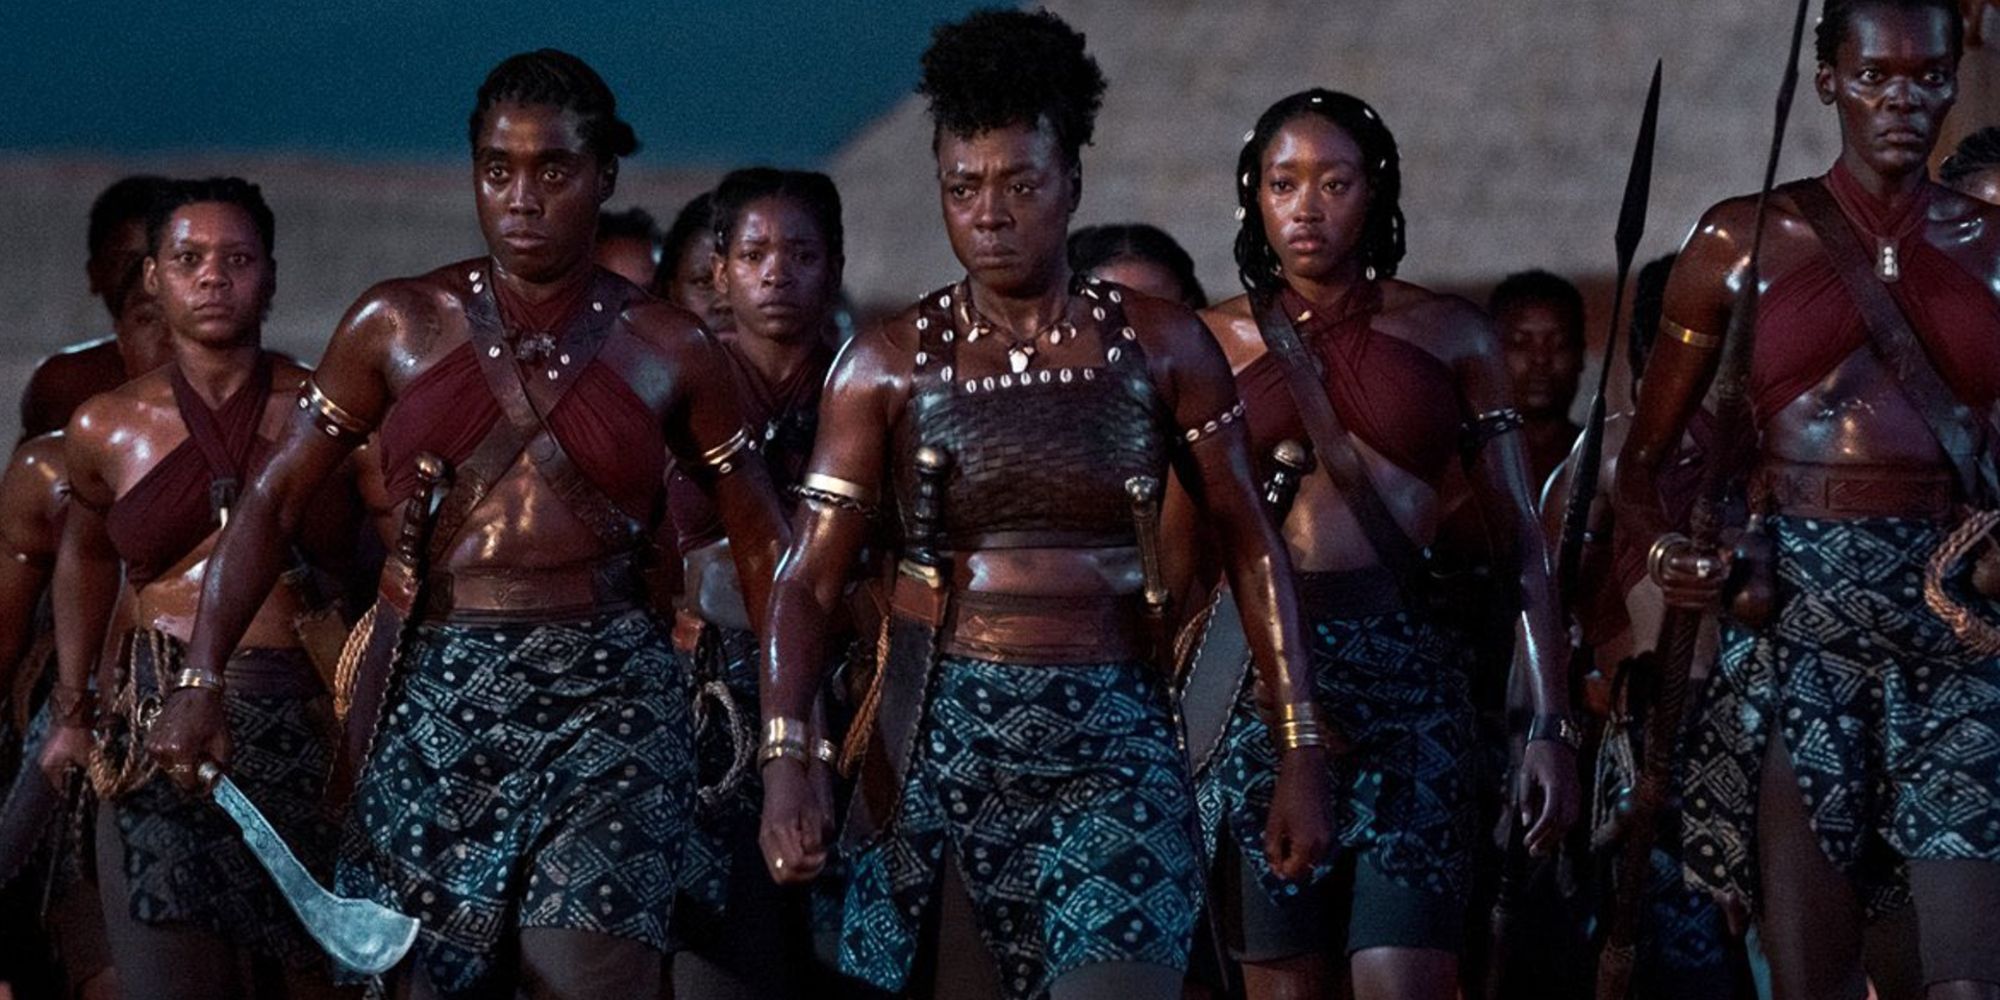 Viola Davis leading a warrior army in The Woman King